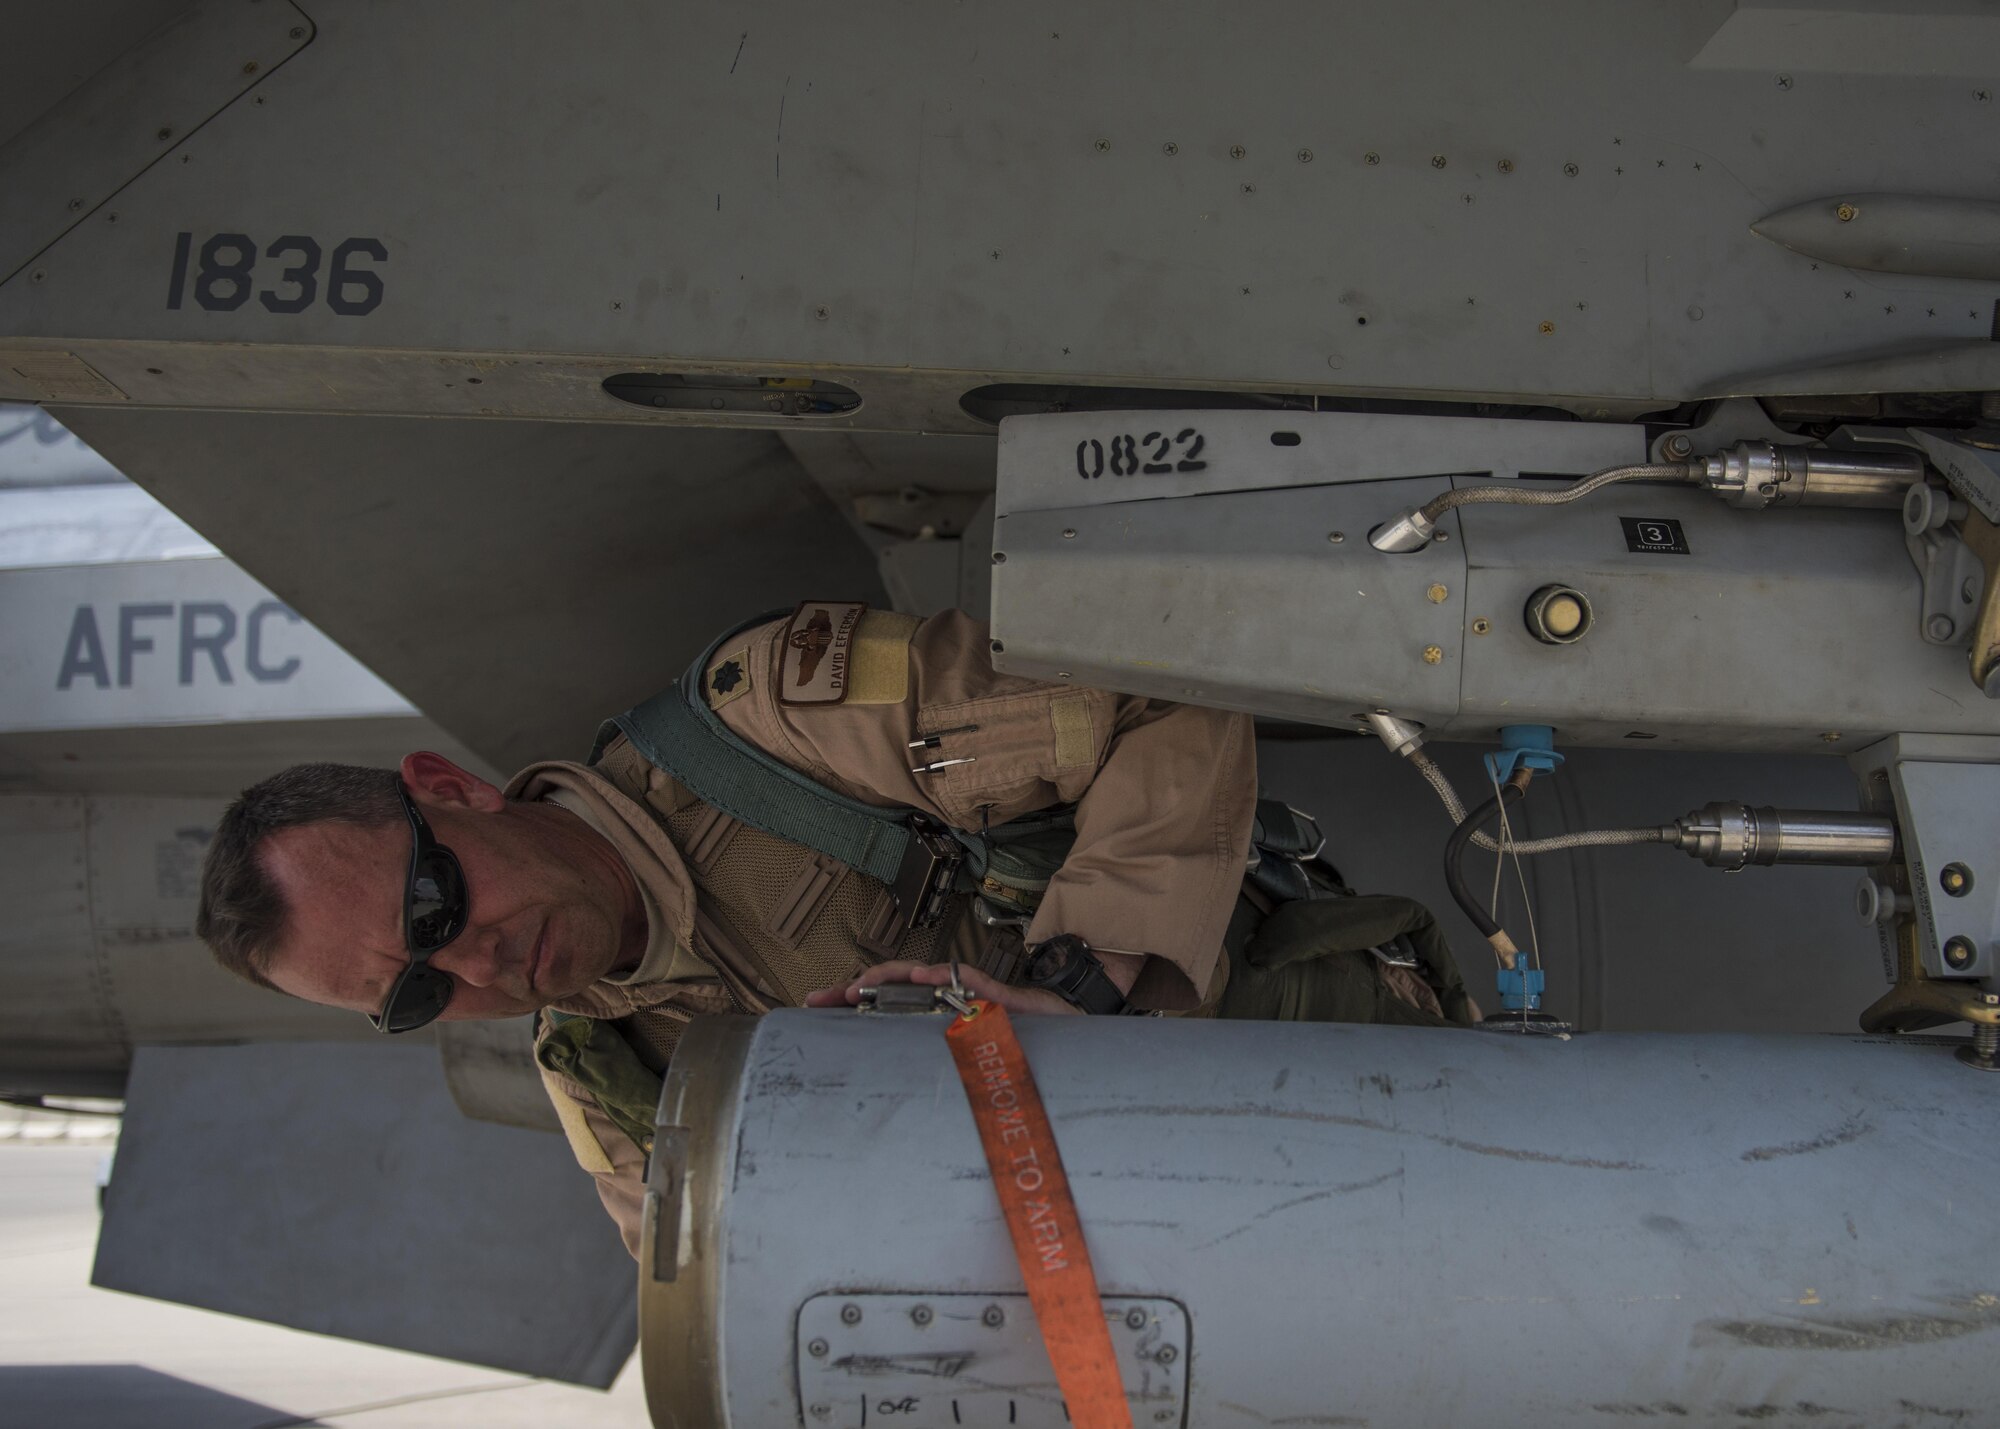 Lt. Col. David Efferson, 457th Expeditionary Fighter Squadron commander, conducts a pre-flight inspection of an F-16C Fighting Falcon, June 28, 2016, Bagram Airfield, Afghanistan. The aircraft receives inspections before takeoff and after landing to see if there are any maintenance issues with the aircraft. (U.S. Air Force photo by Senior Airman Justyn M. Freeman)